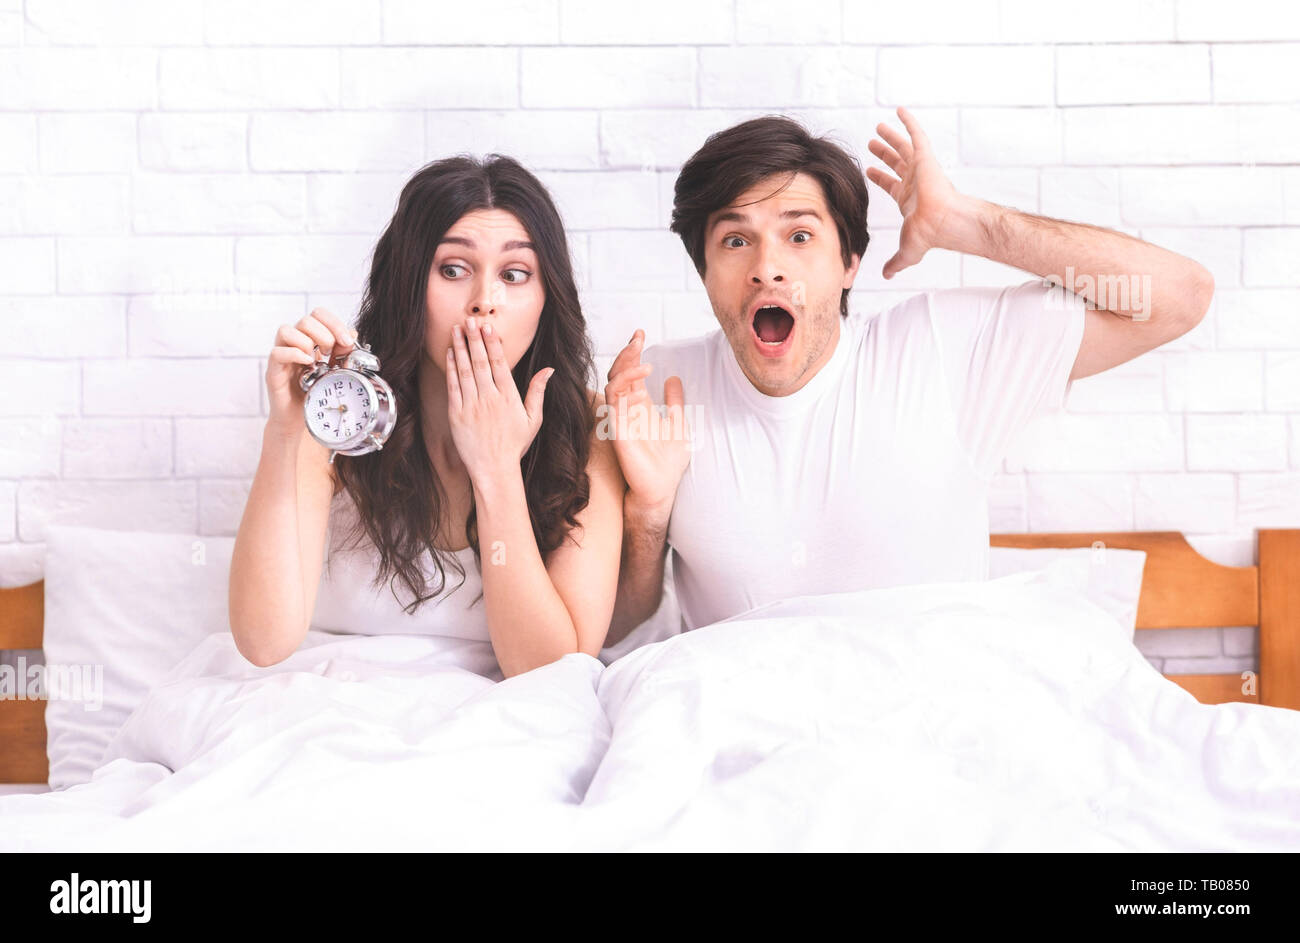 Confused couple missed ringing of alarm clock in bed Stock Photo